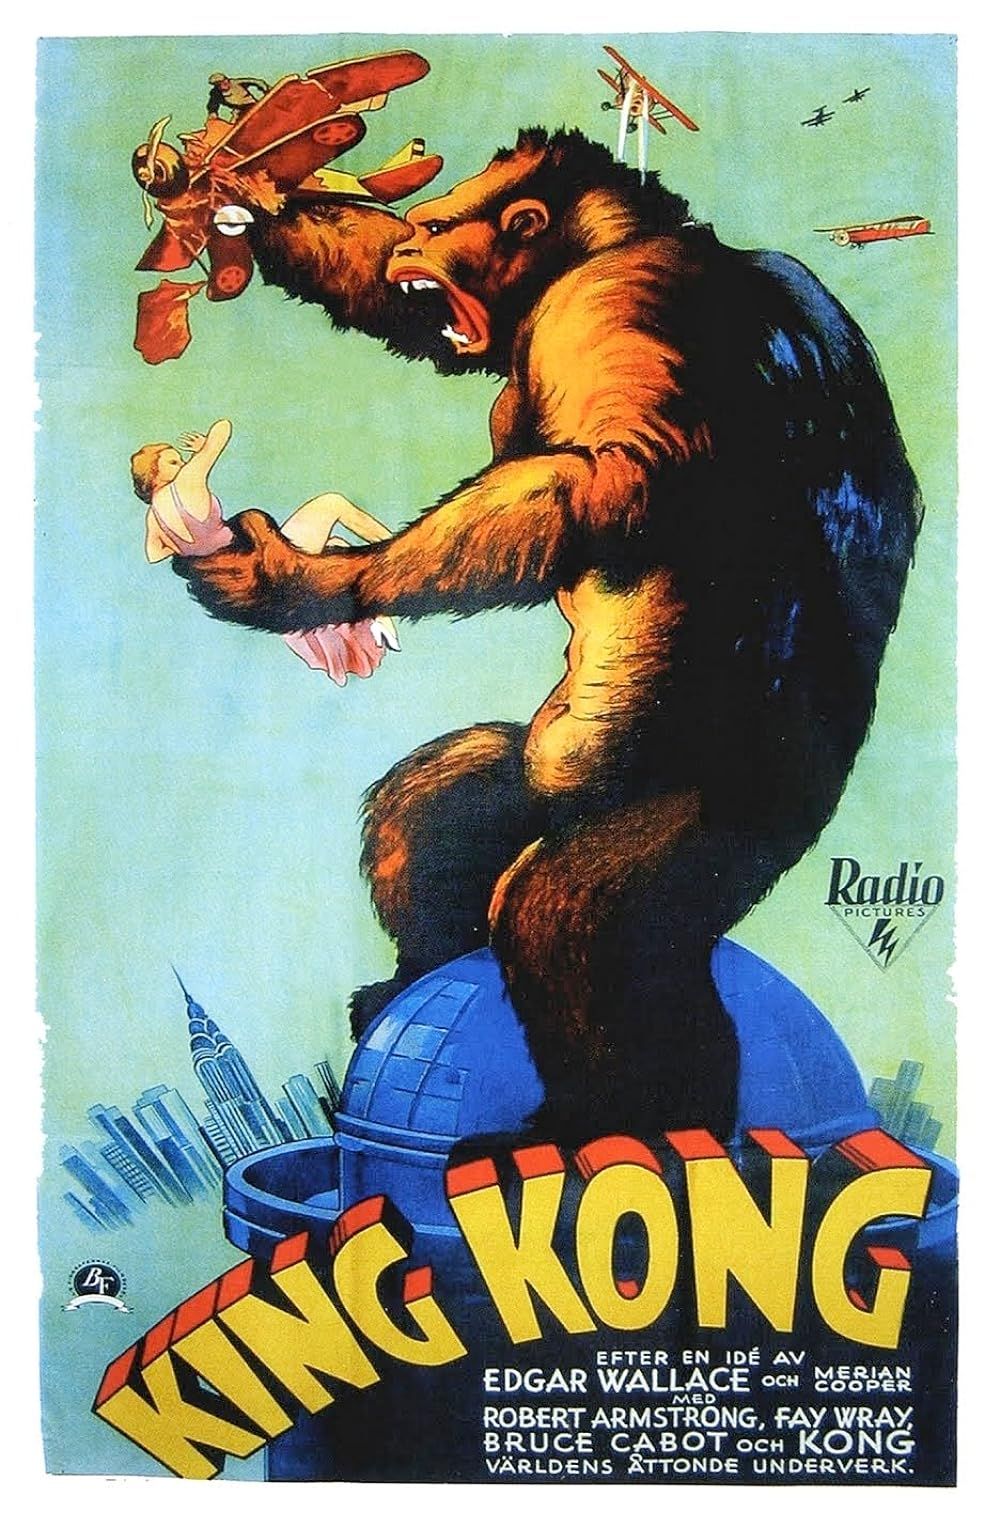 In an illustrated image, King Kong holds onto Fay Wray while destroying a plane.